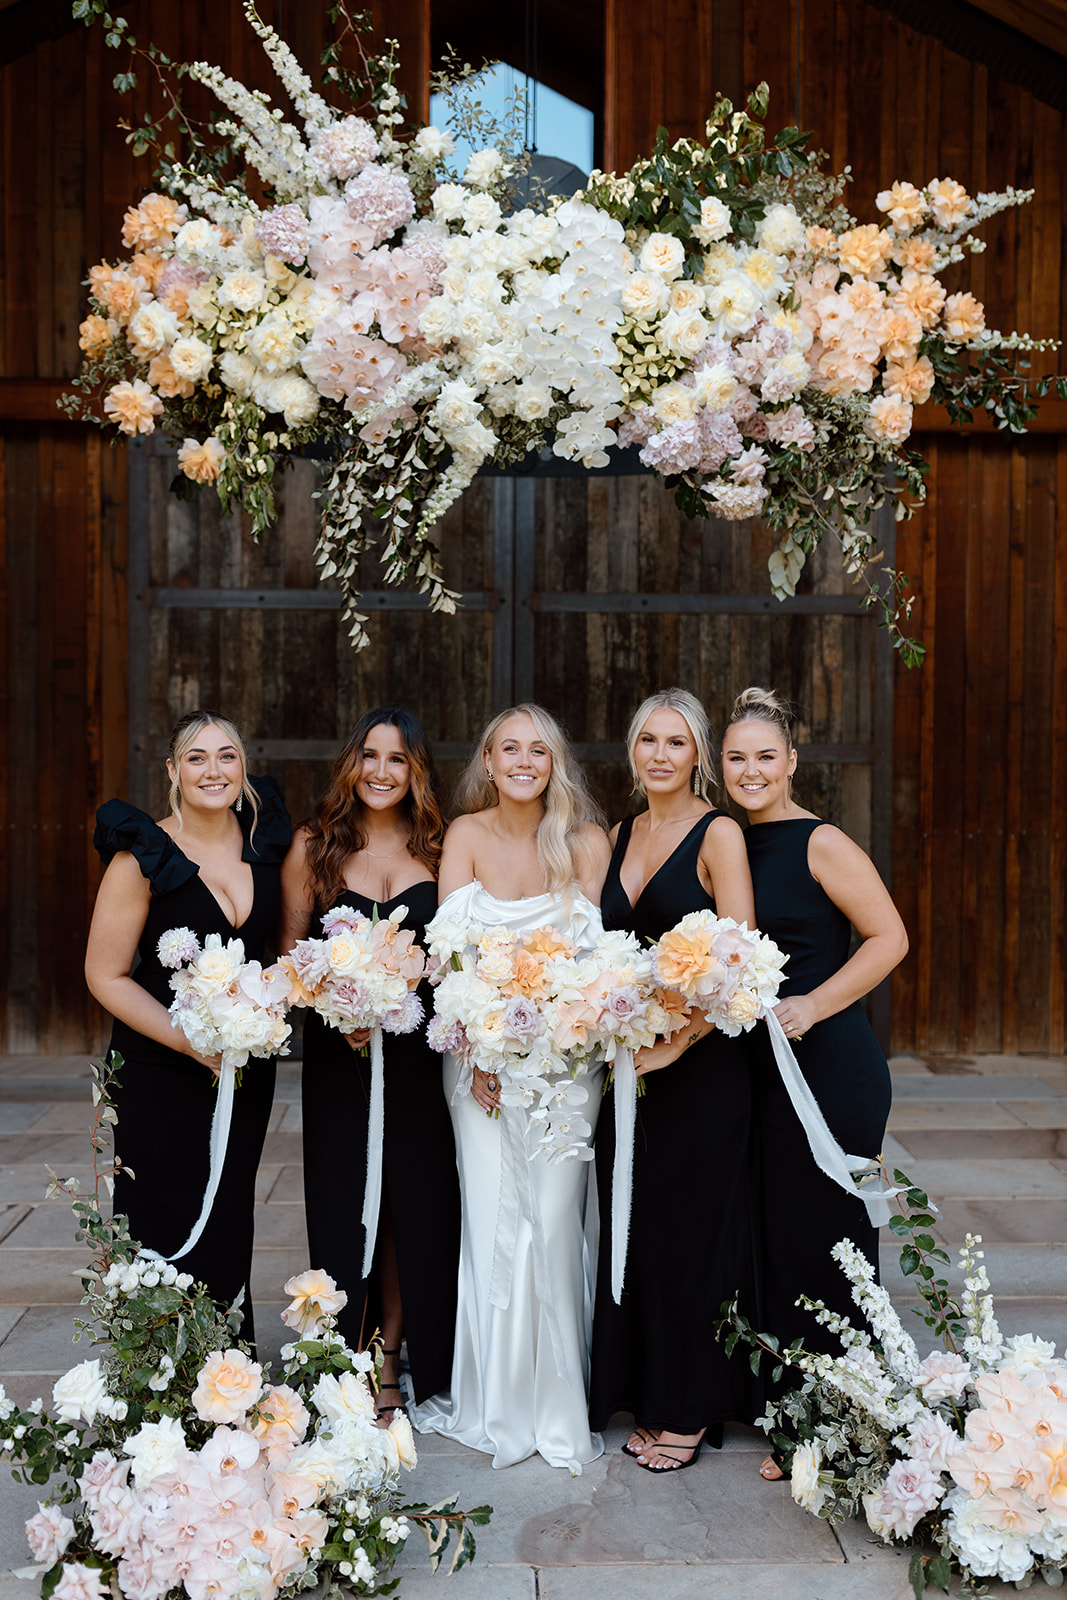 Bride with her bridesmaids at the wedding in the Southern Highlands Bendooley Estate